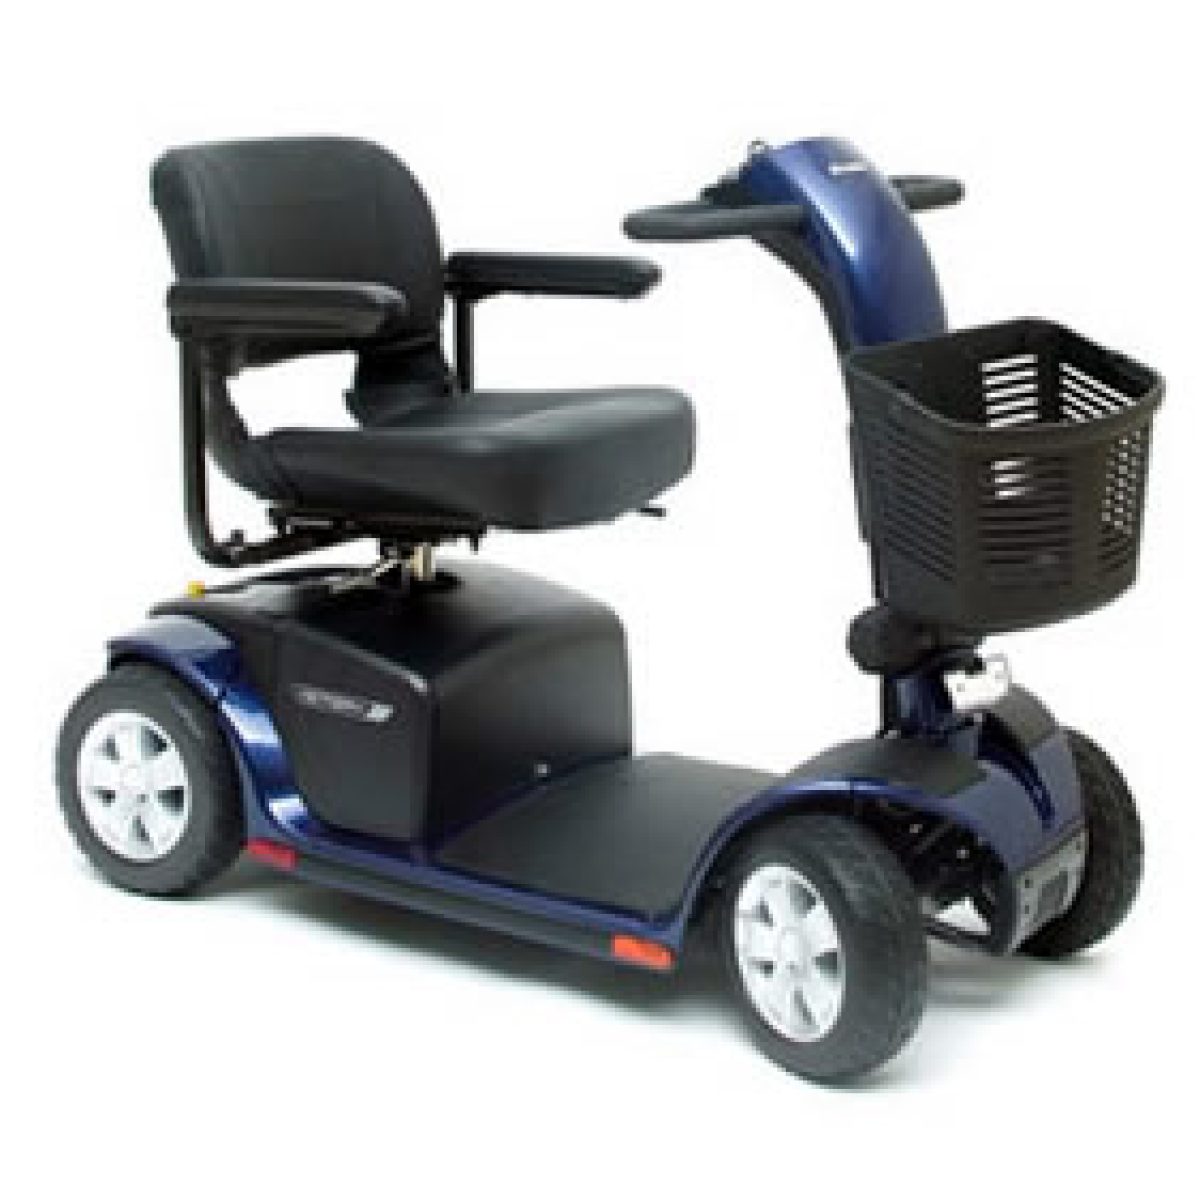 4 Wheels Mobility Scooter – Weight Capacity 400 lbs. 2